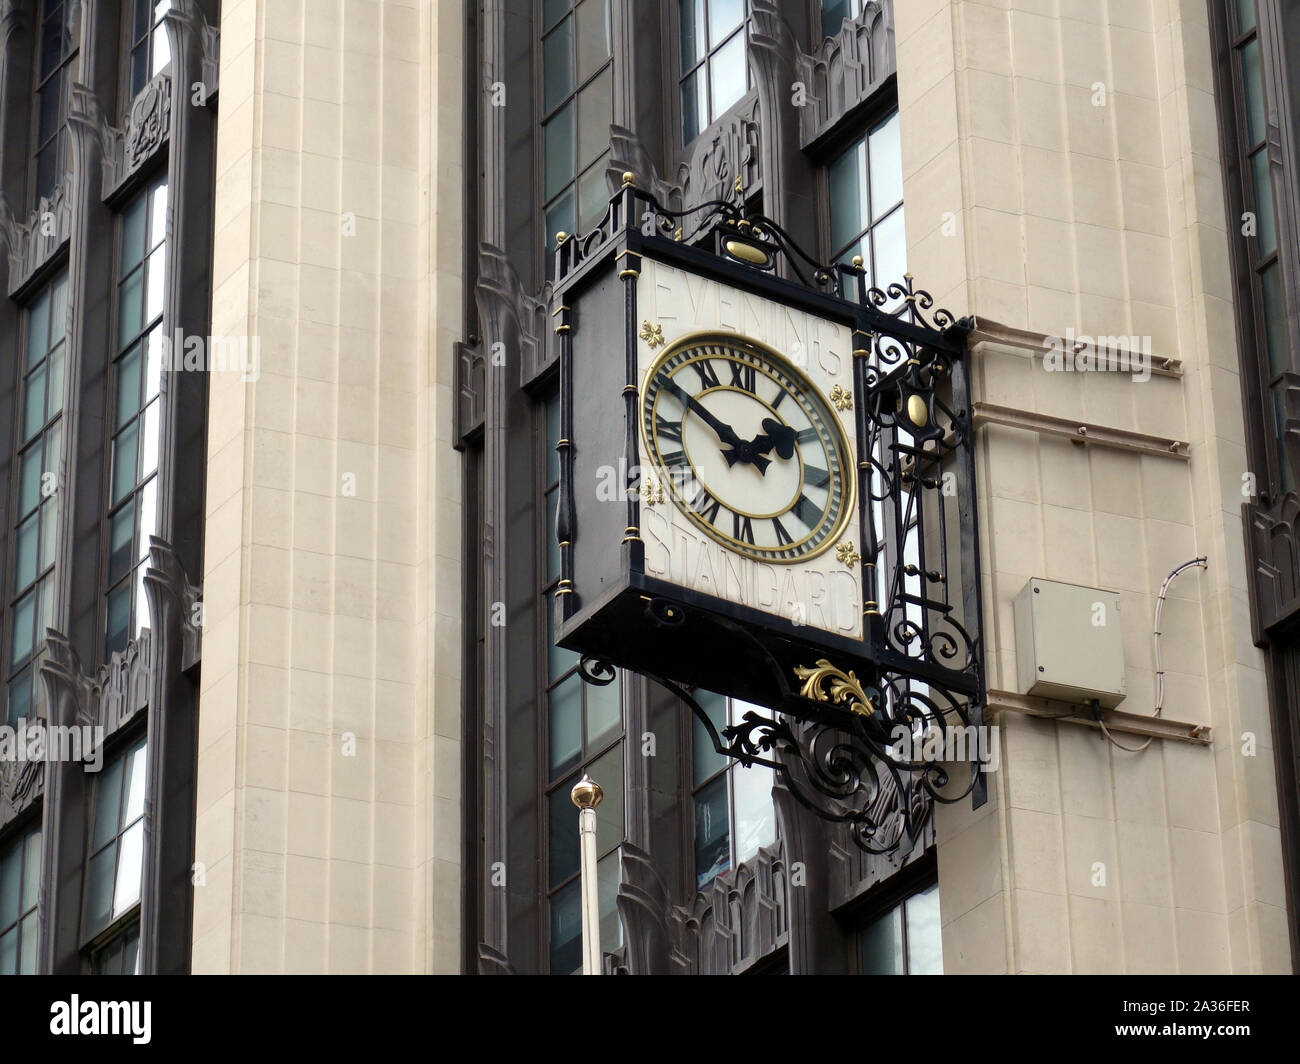 A ornate clock on the side of the Old Evening Standard Building in London Stock Photo